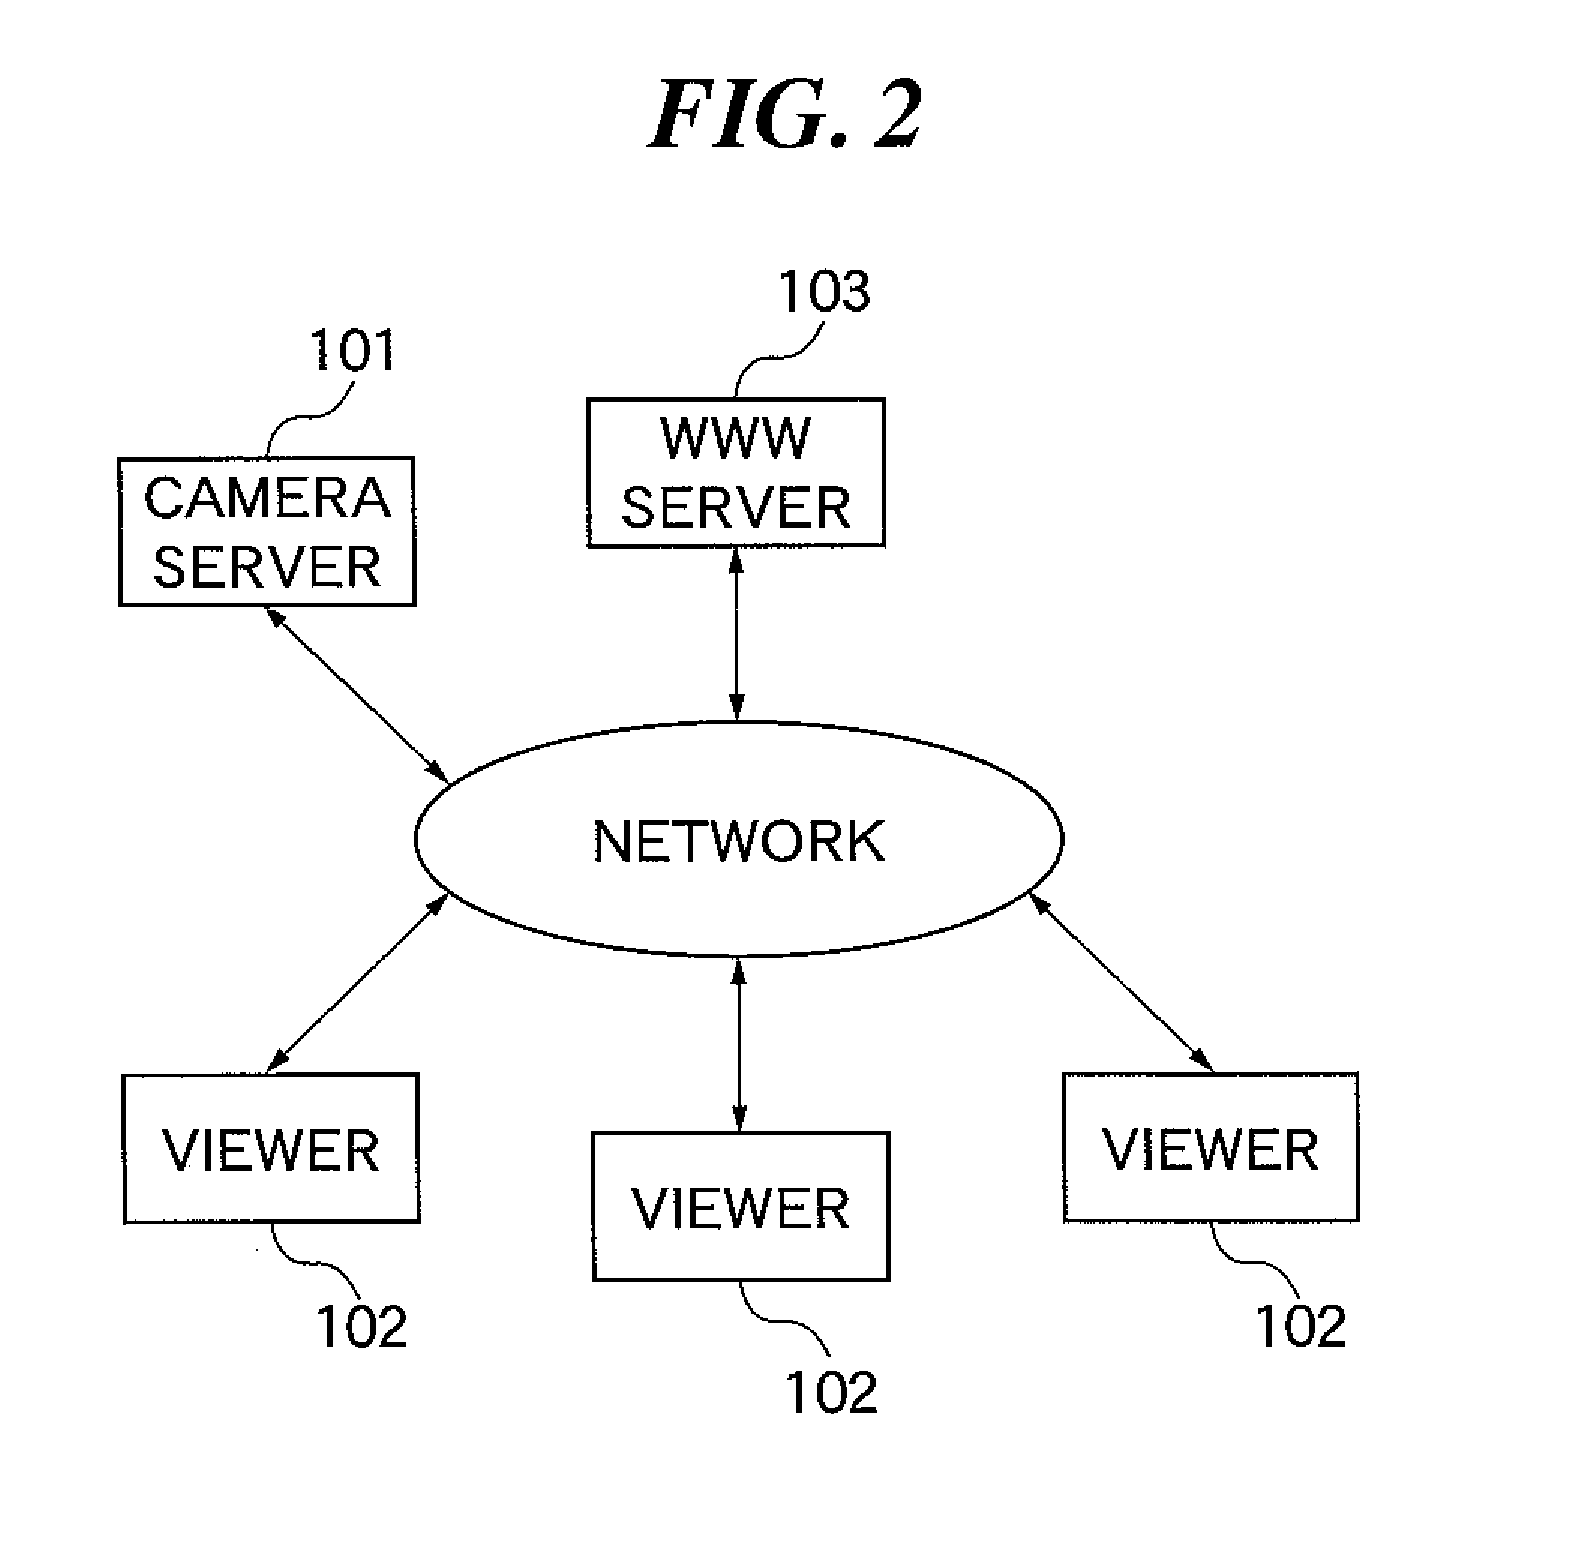 Video distribution apparatus, viewer apparatus, video distribution system including these apparatuses, control method for the video distribution apparatus, control method for the viewer apparatus, and computer program for the apparatuses